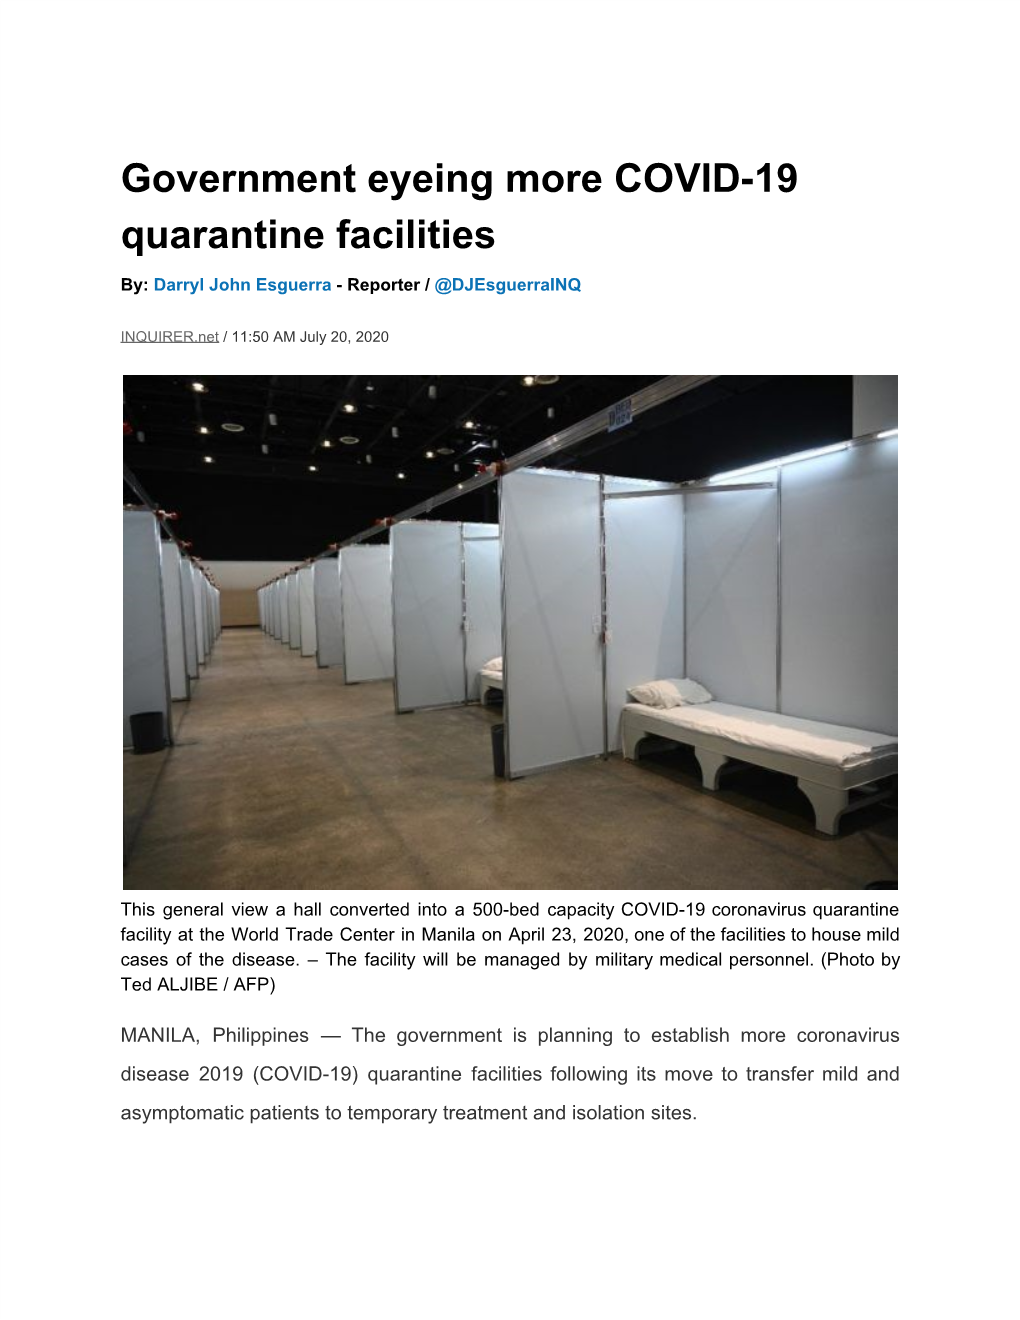 Government Eyeing More COVID-19 Quarantine Facilities